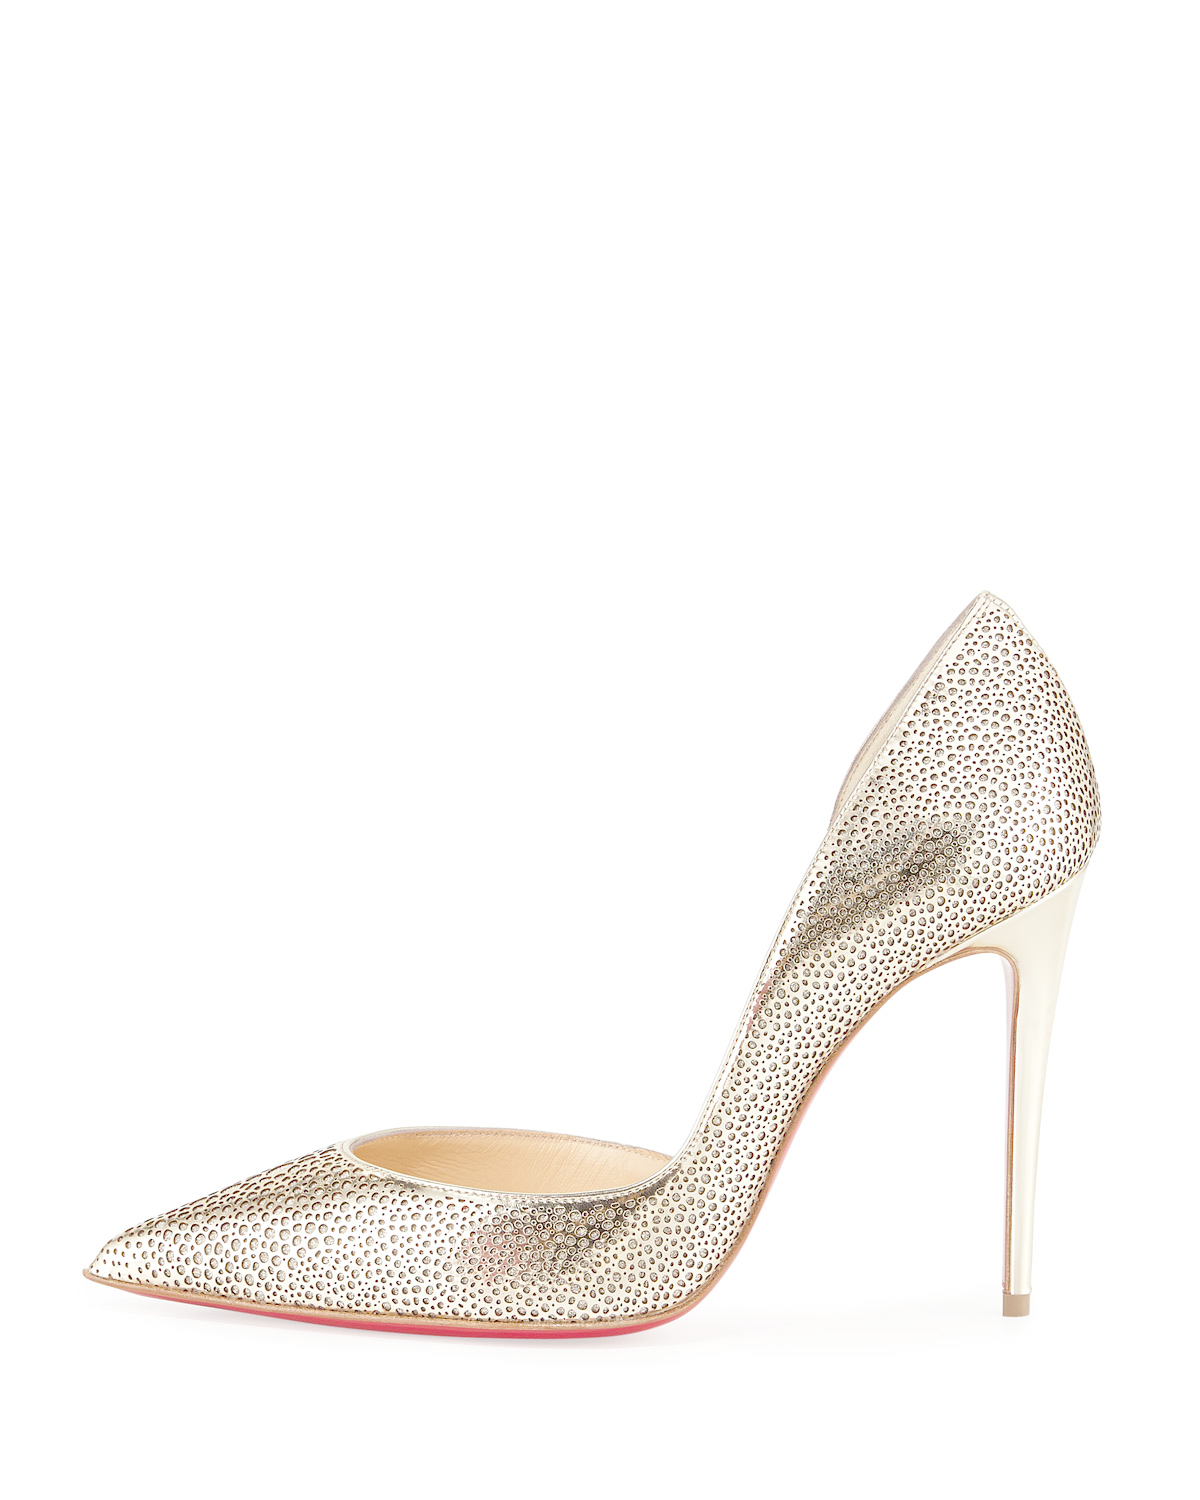 Christian Louboutin Galu Half-d'Orsay Leather Pumps in Gold (Metallic) -  Lyst